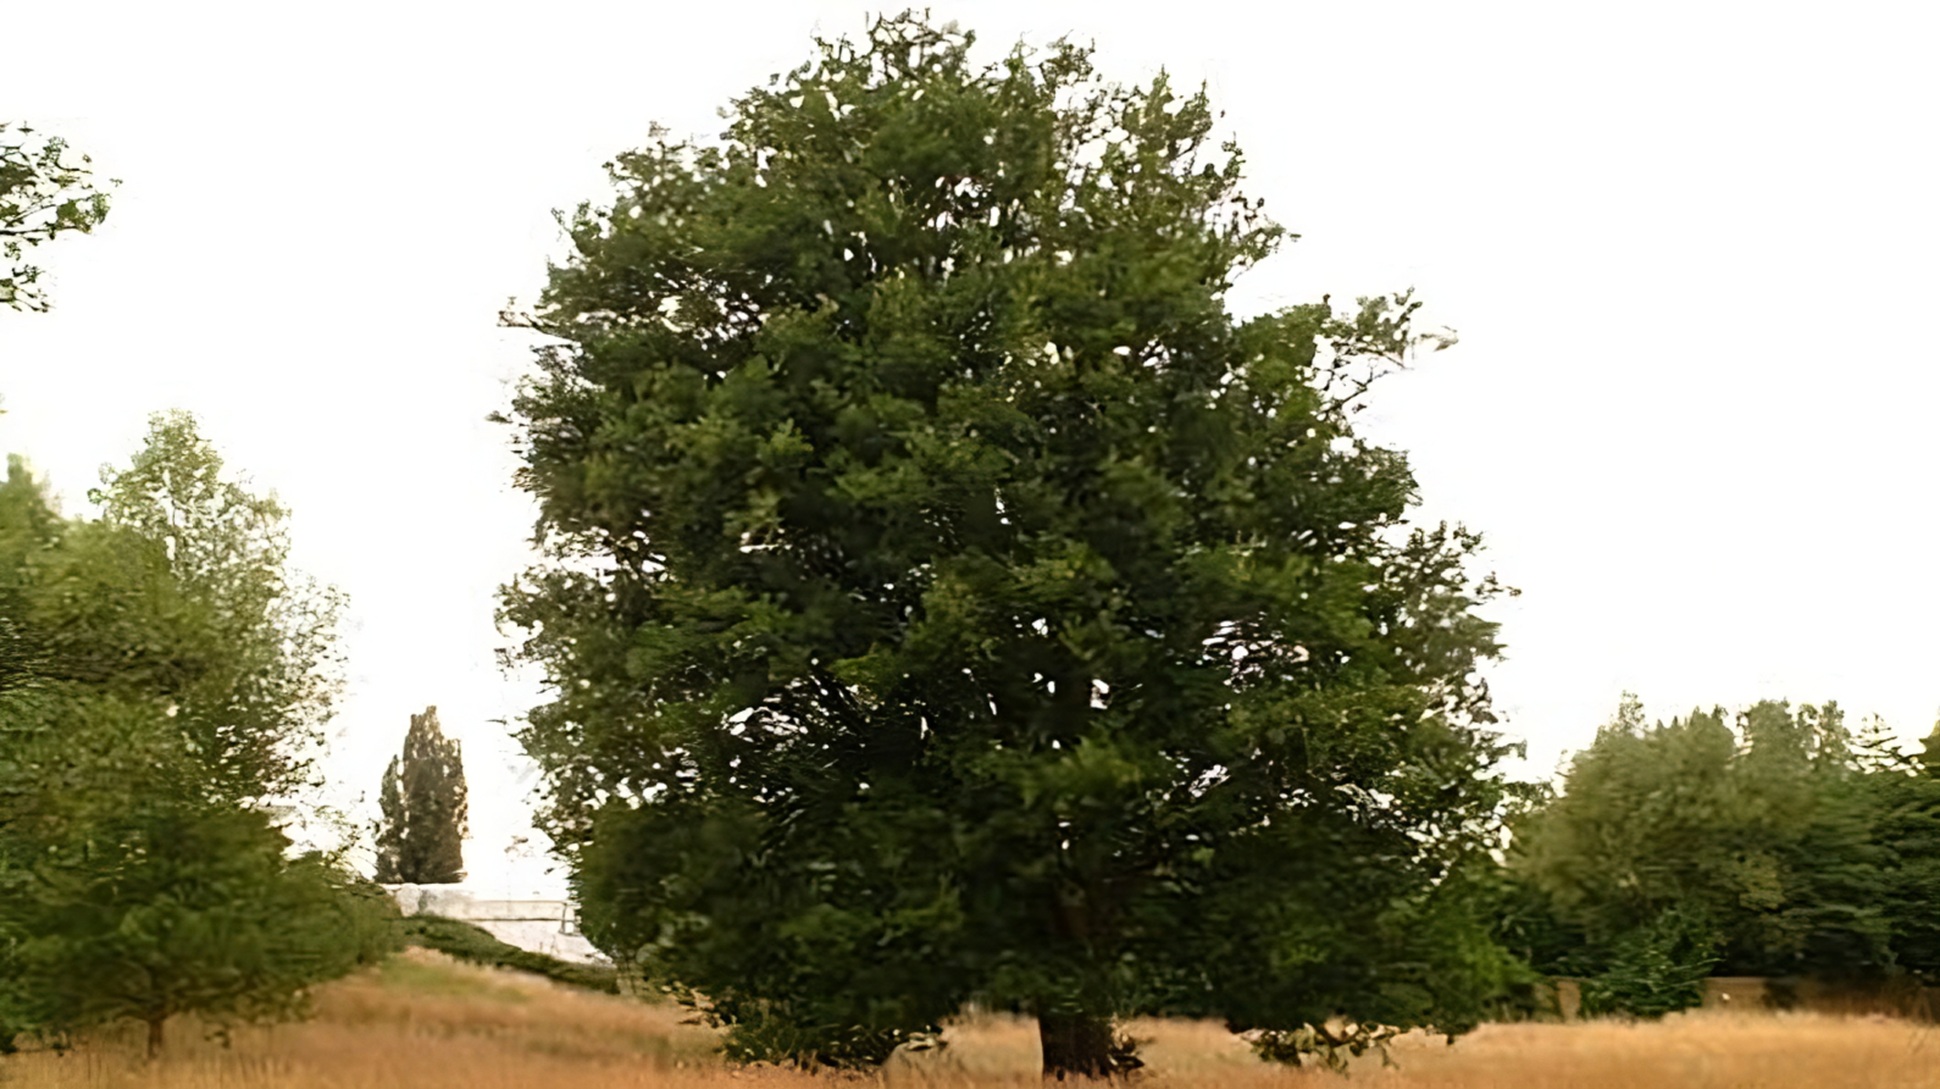 A large green tree standing in a yellow field